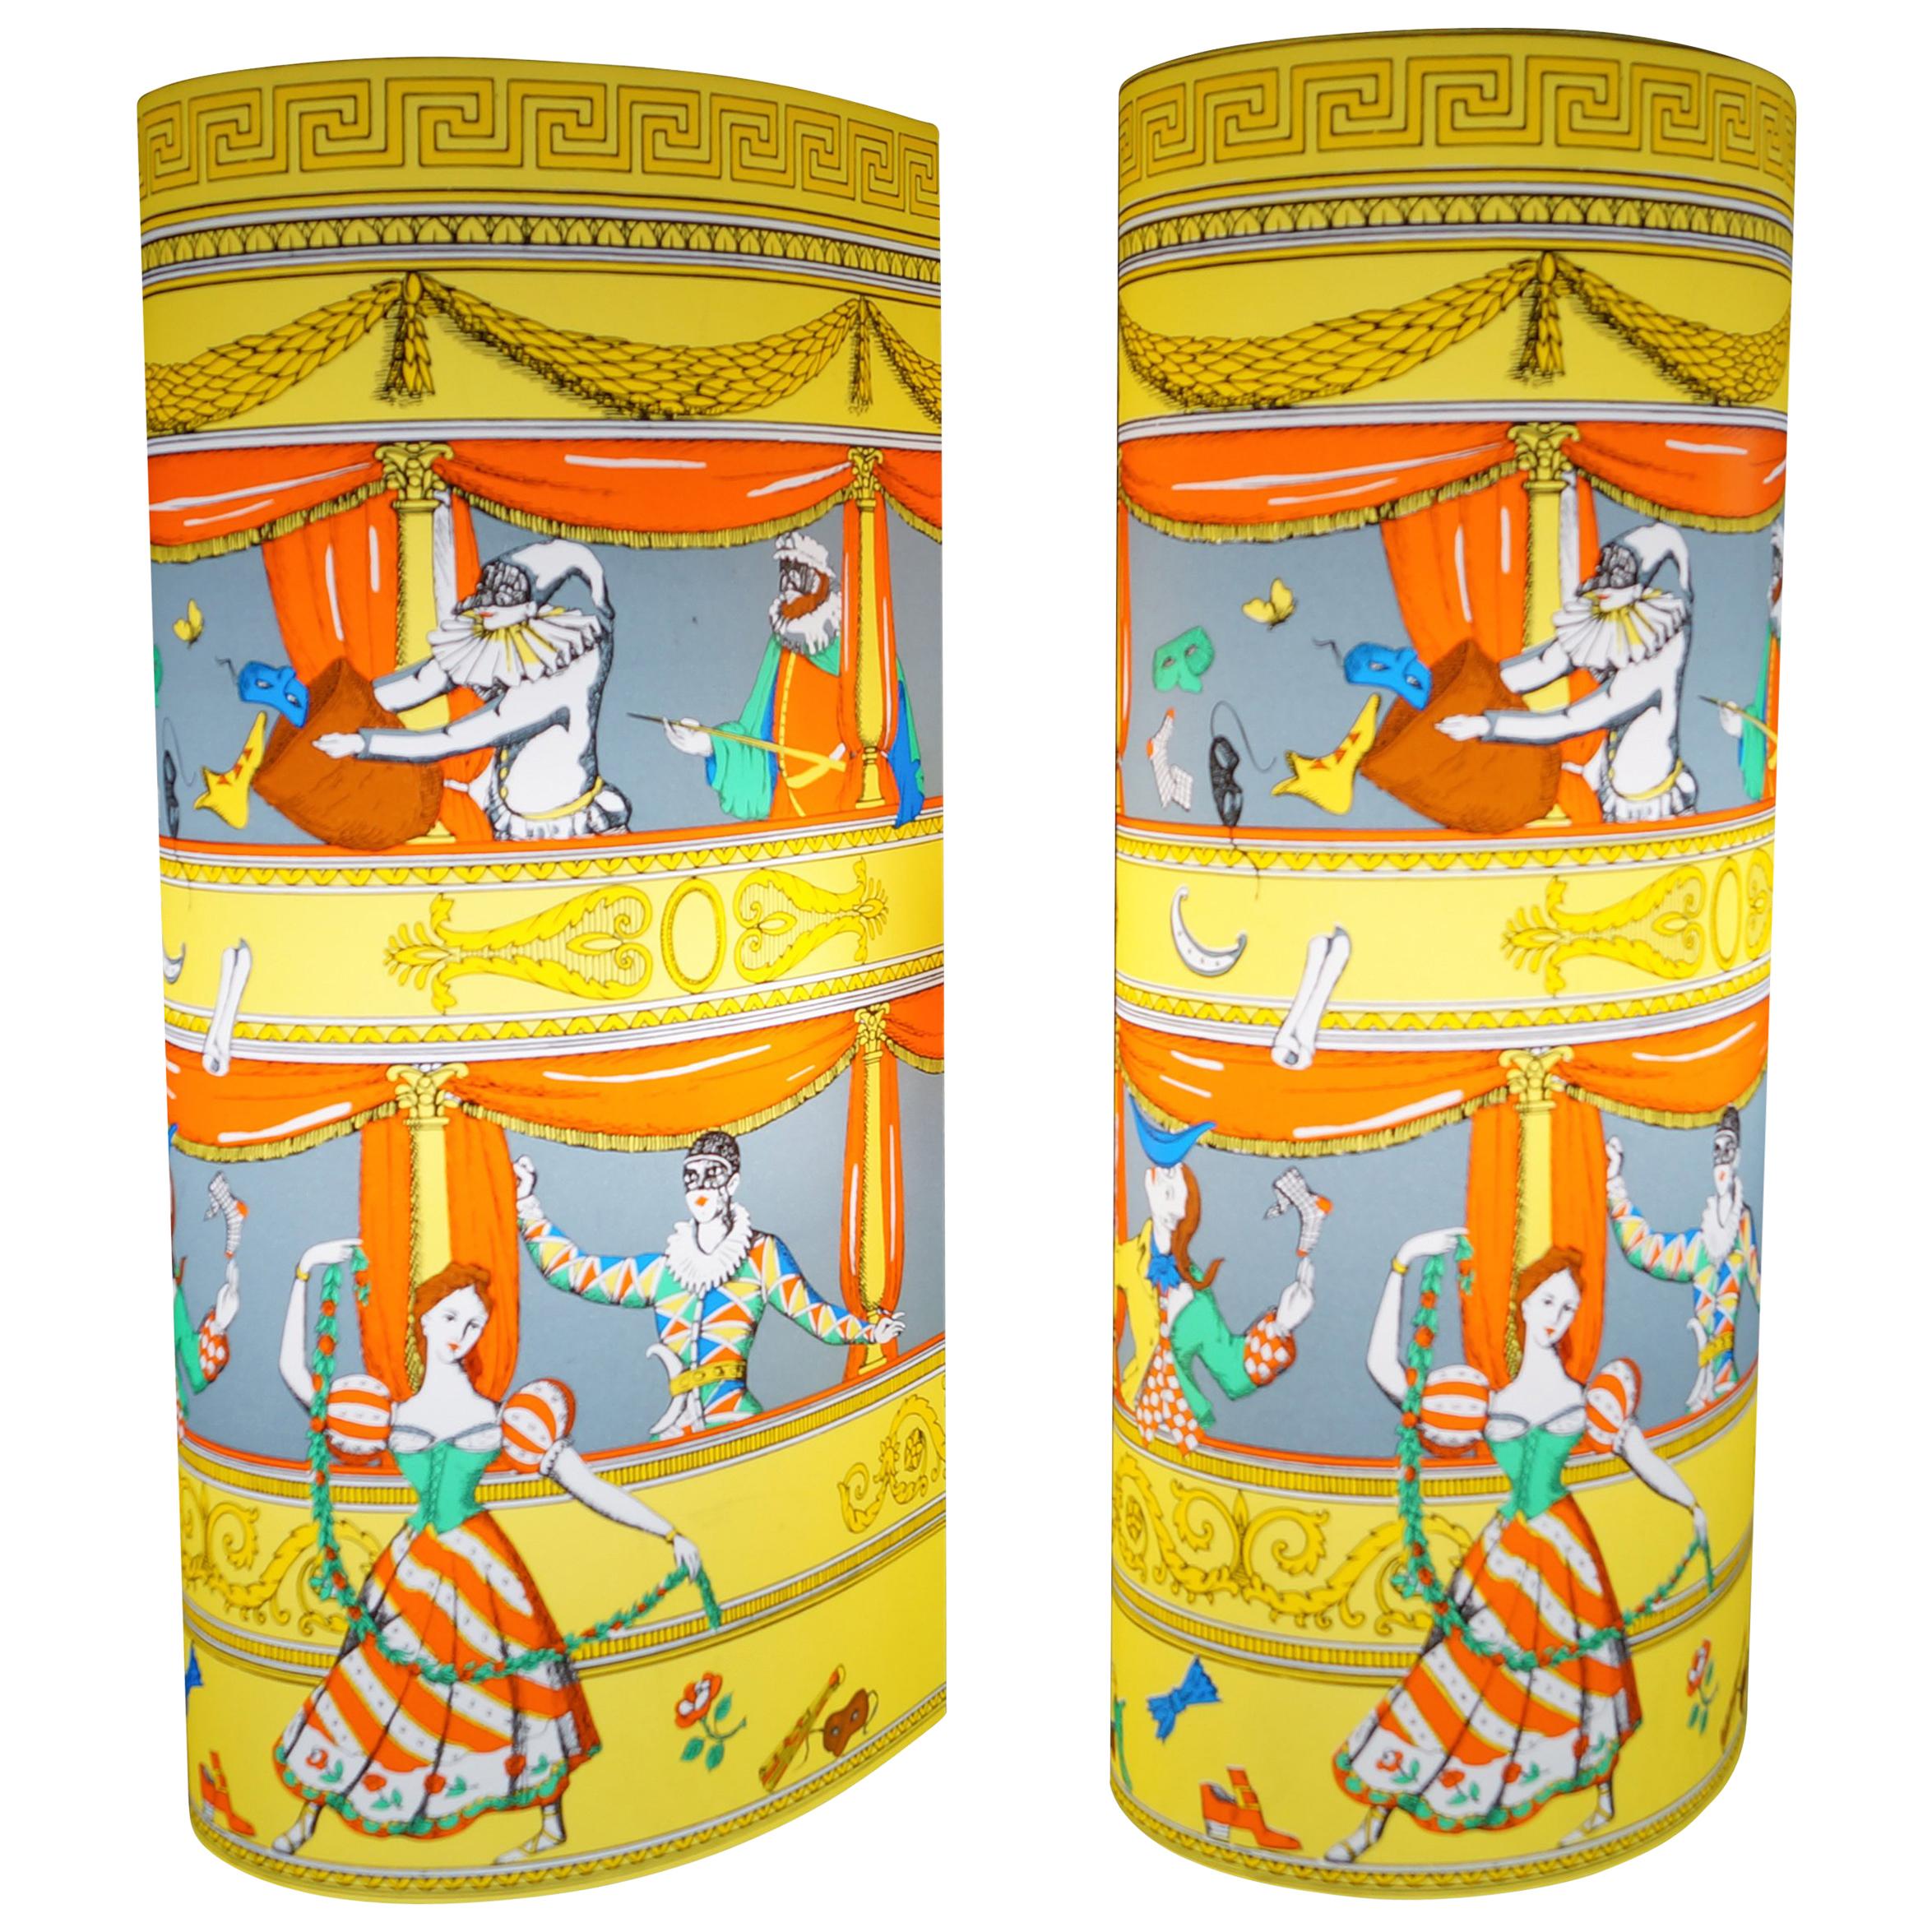 Perspex Table Lamps Pair by Barnaba Fornasetti Commedia Italiana Media, 1995 For Sale